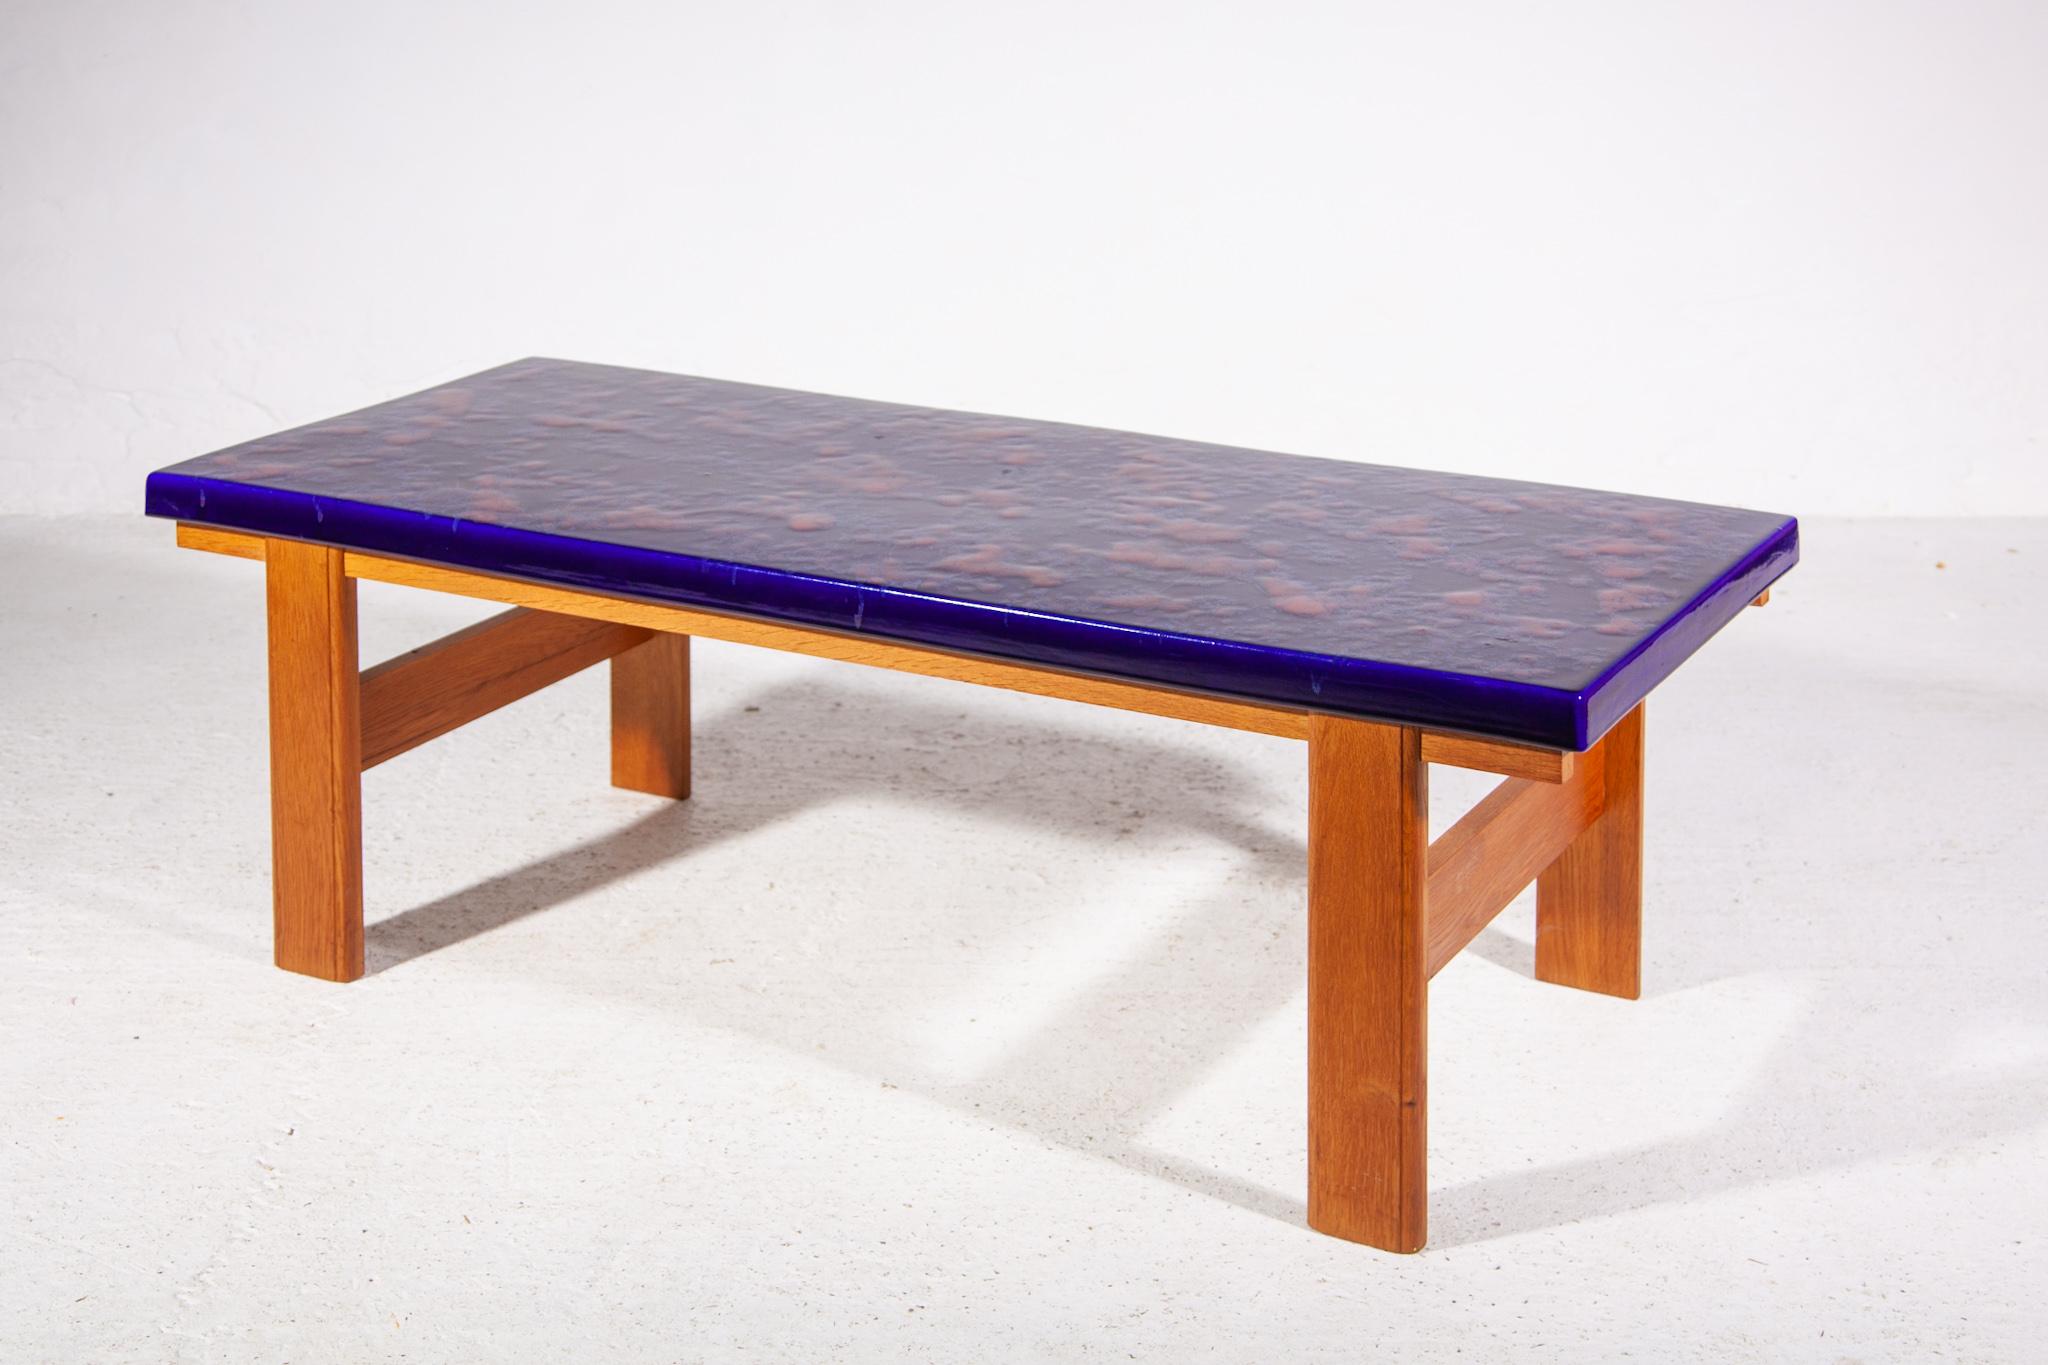 Glazed Large Rectangular Top Ceramic Blue and Orange Tile Coffee Table, 1970s For Sale